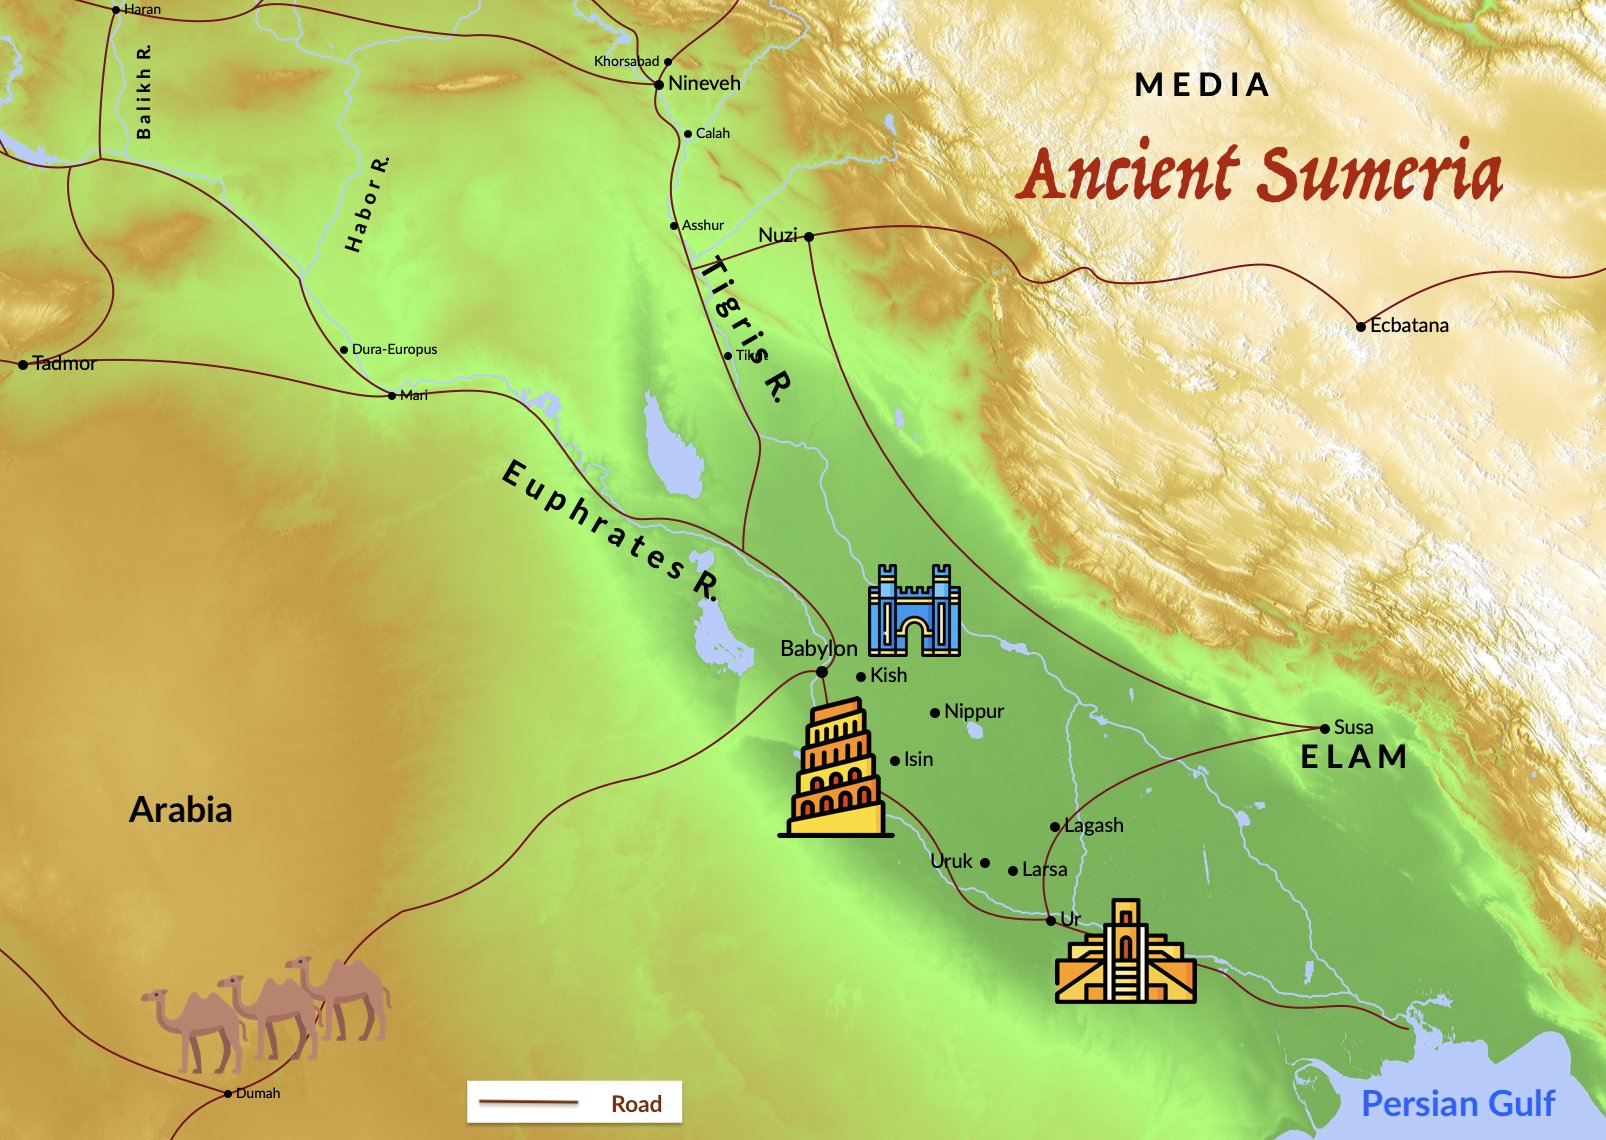 Ancient Sumerian origins are shrouded in mystery. Ancient Sumeria is mankind's first recorded civilization.